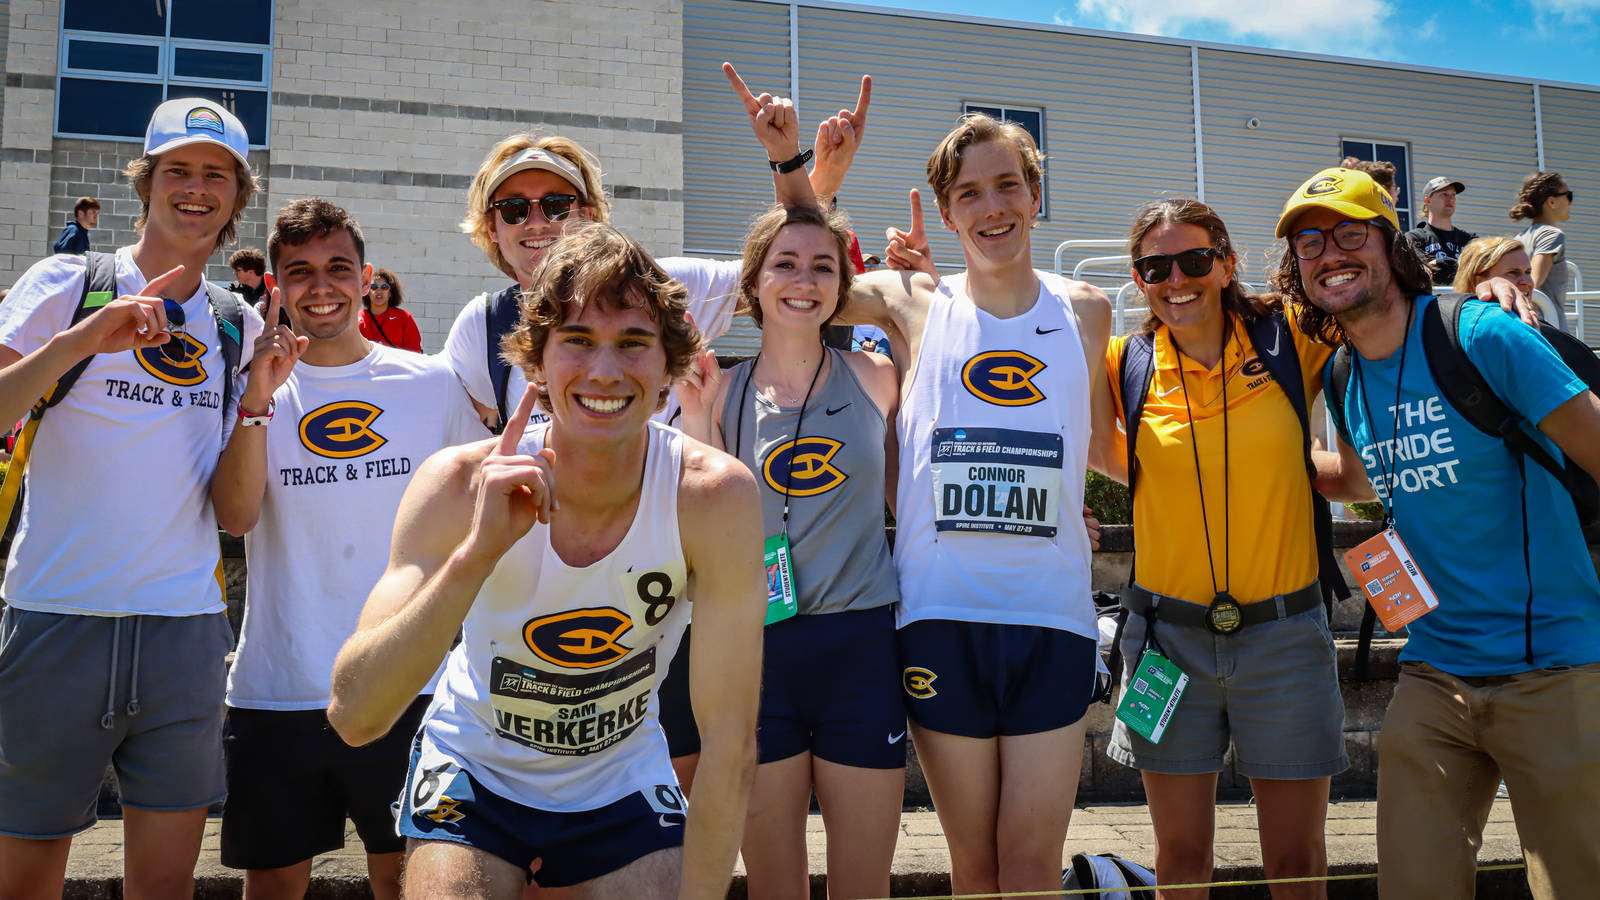 Sam Verkerke, who won the individual national championship in the 1,500-meter run, celebrates with members of the Blugold track and field team during the championship meet.